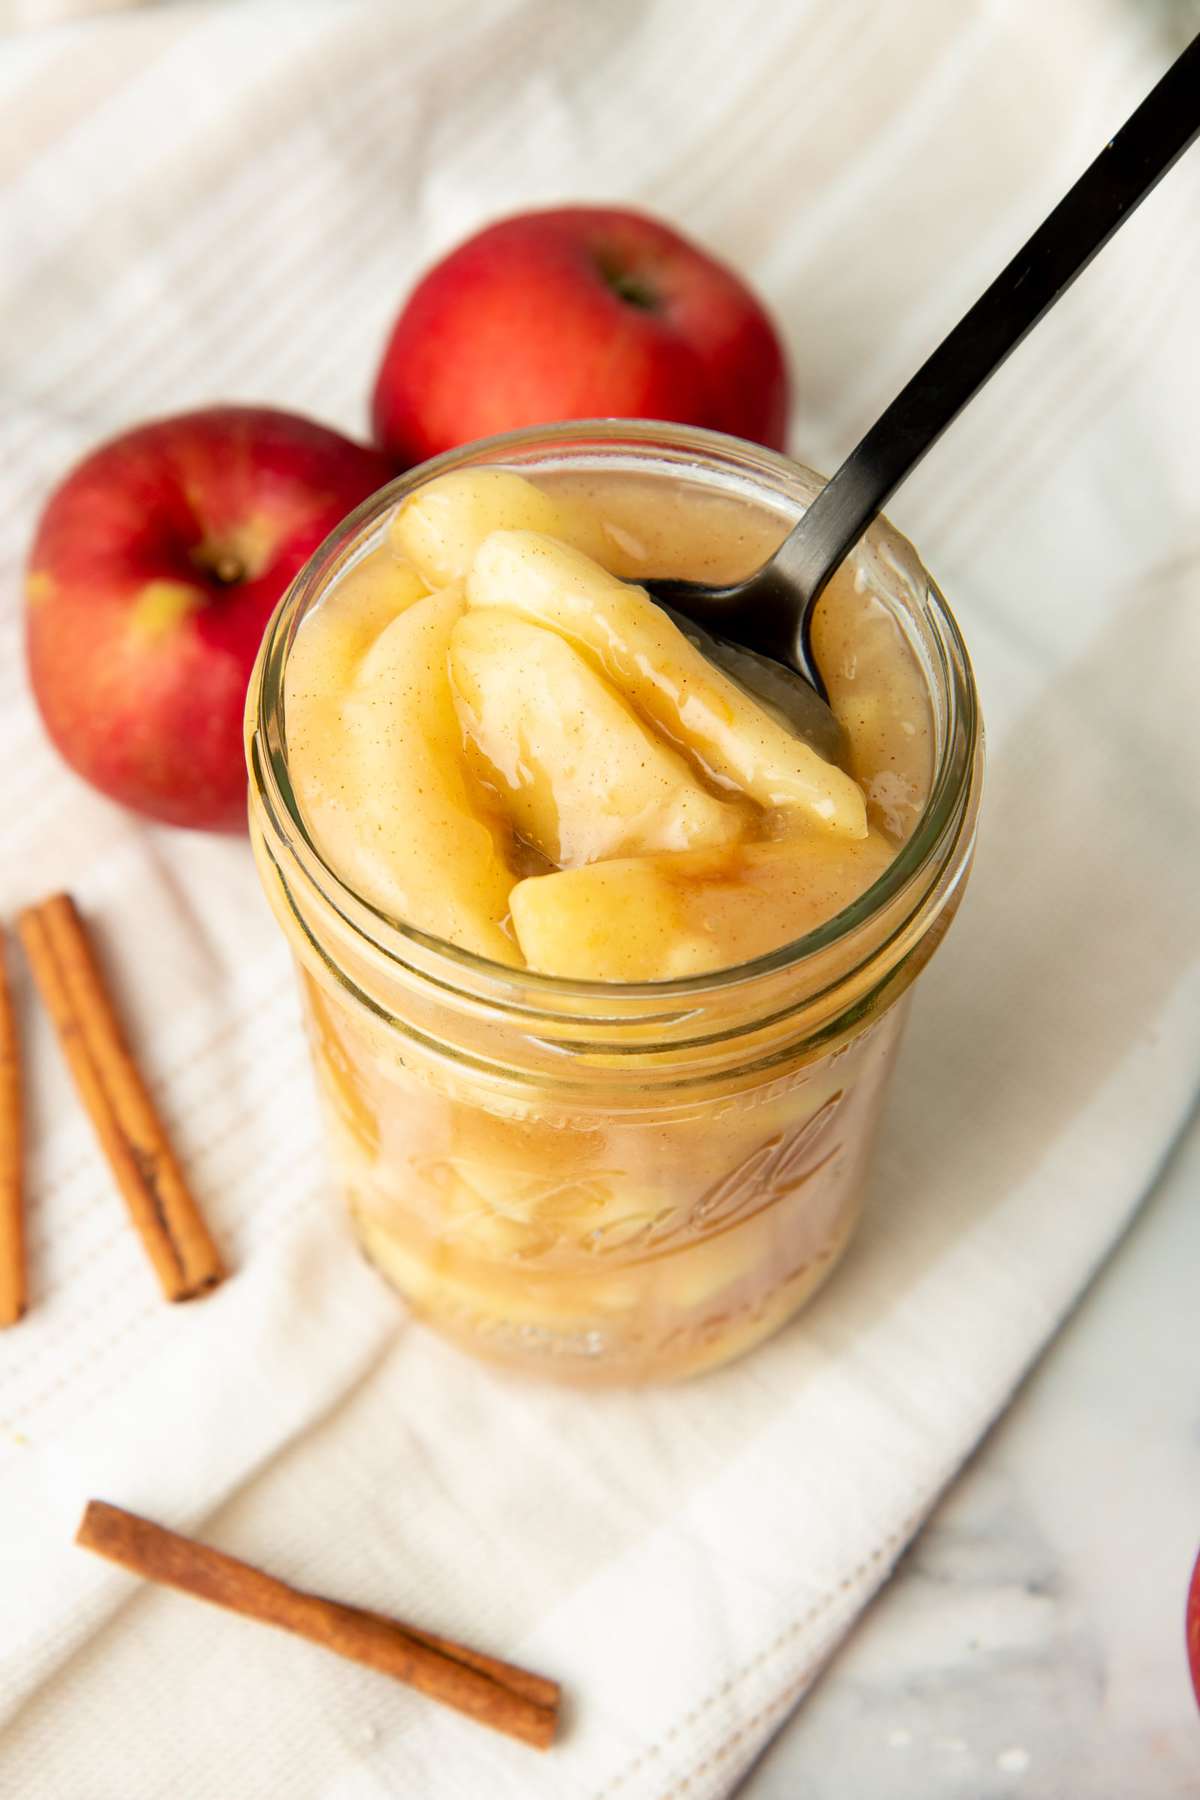 A spoon scoops apple pie filling from a Ball canning jar.